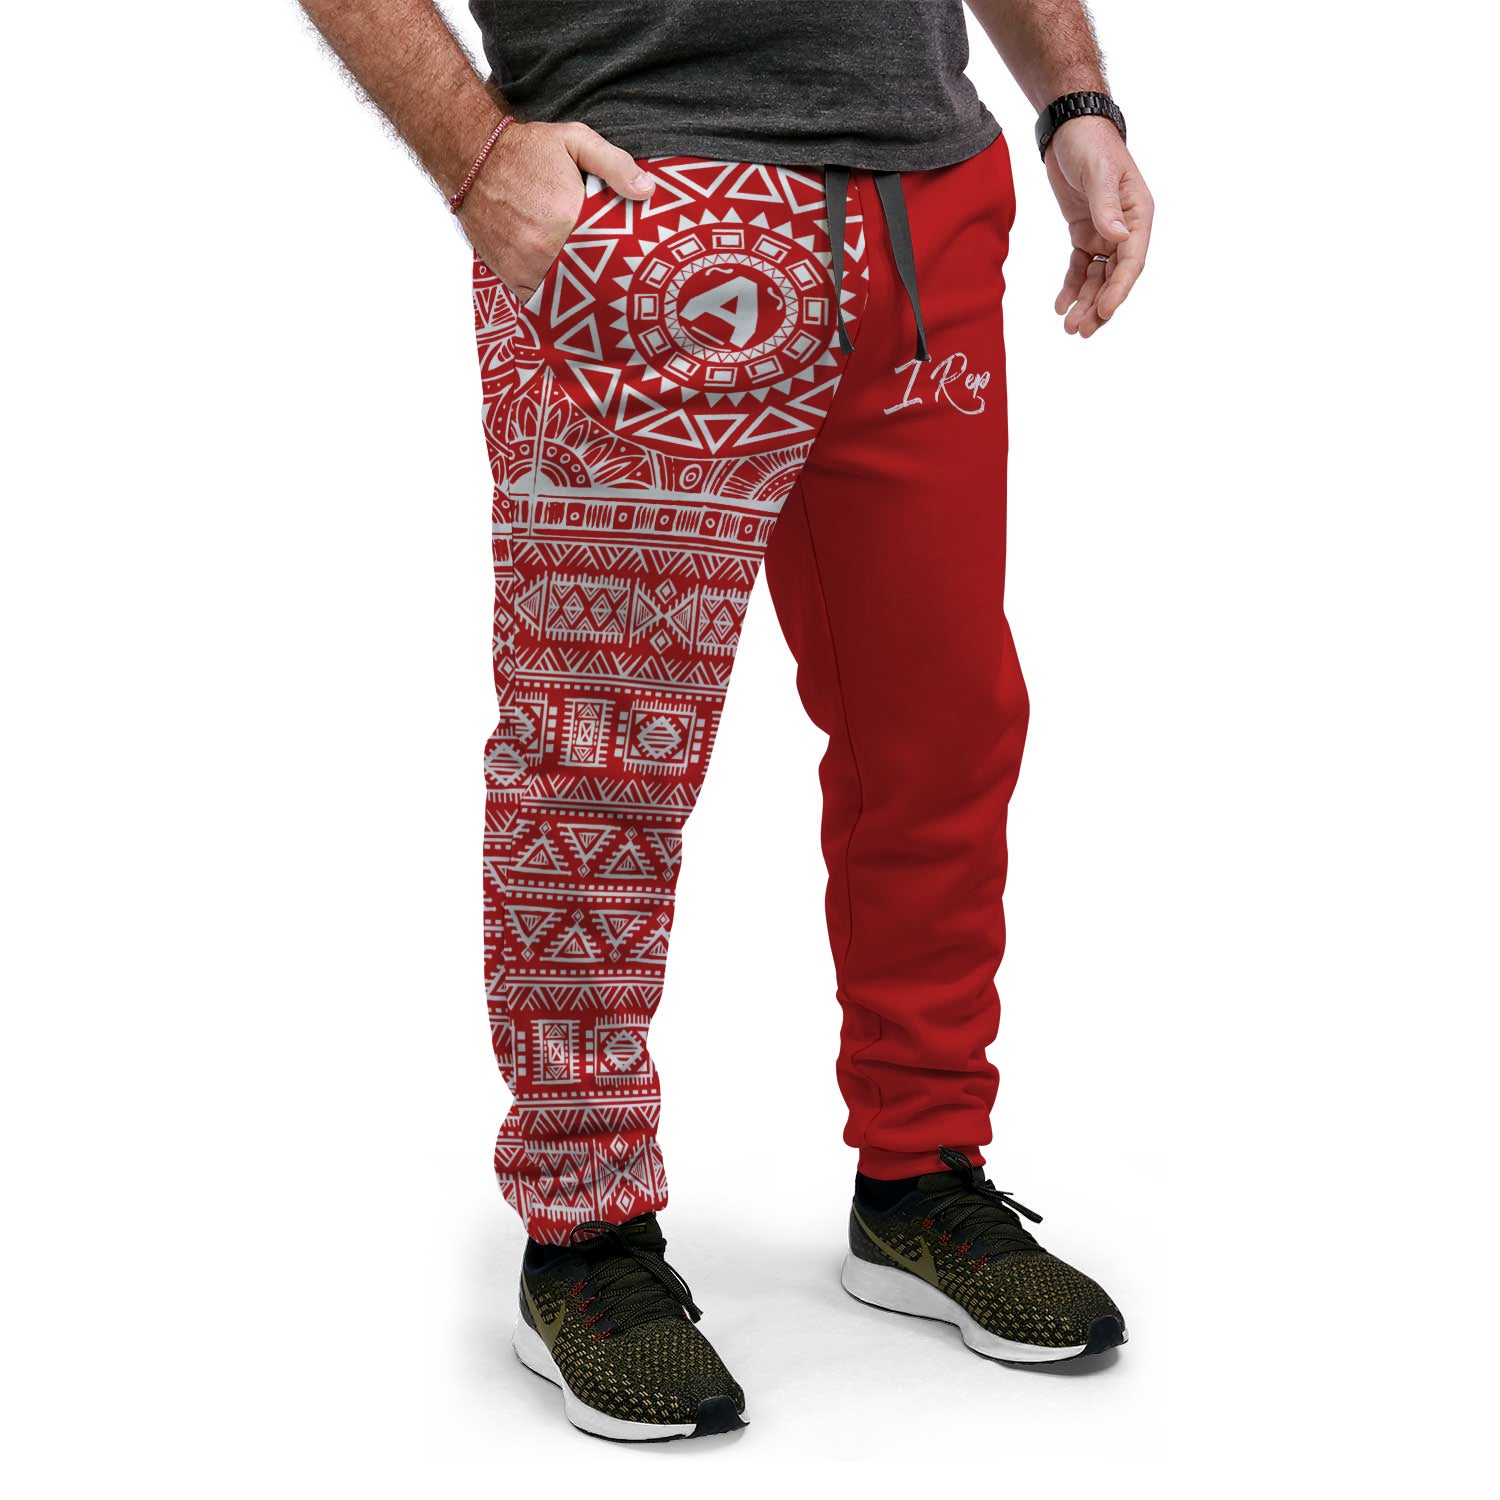 I REP JOGGERS - White&Red